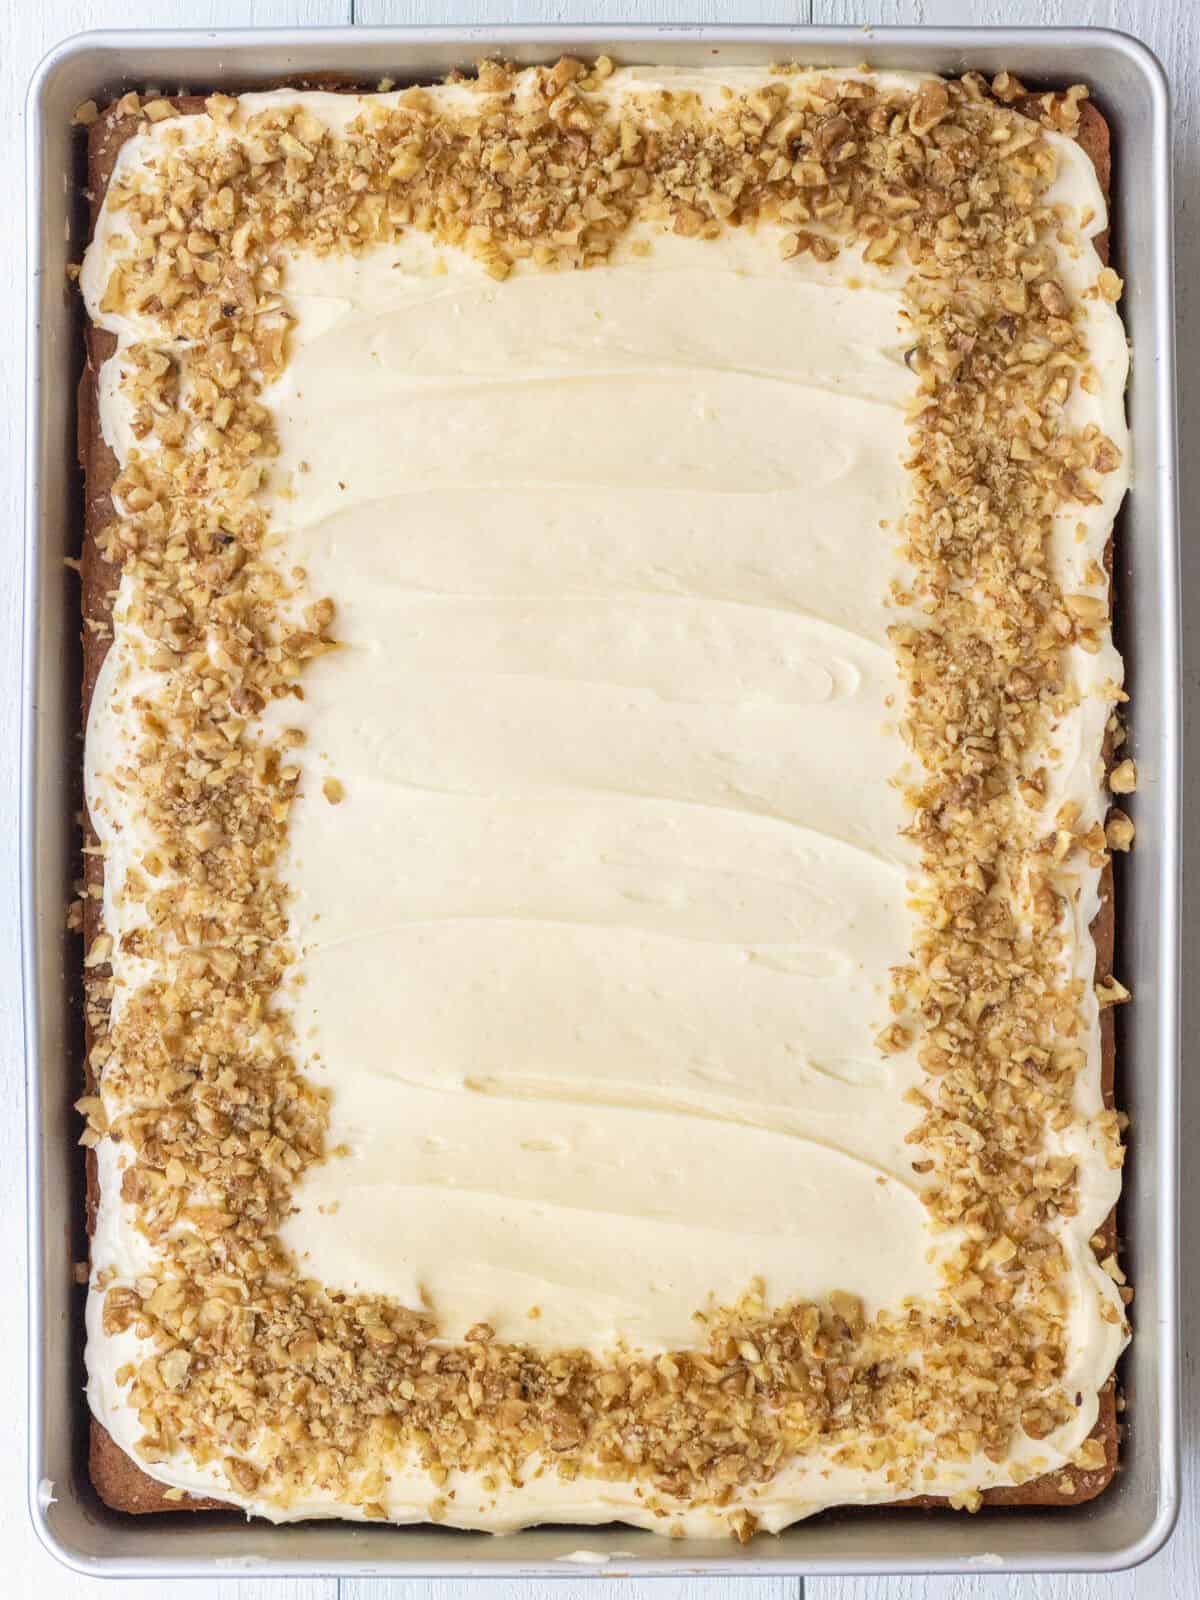 Chopped walnuts around the edges of banana cake topped with cream cheese frosting.